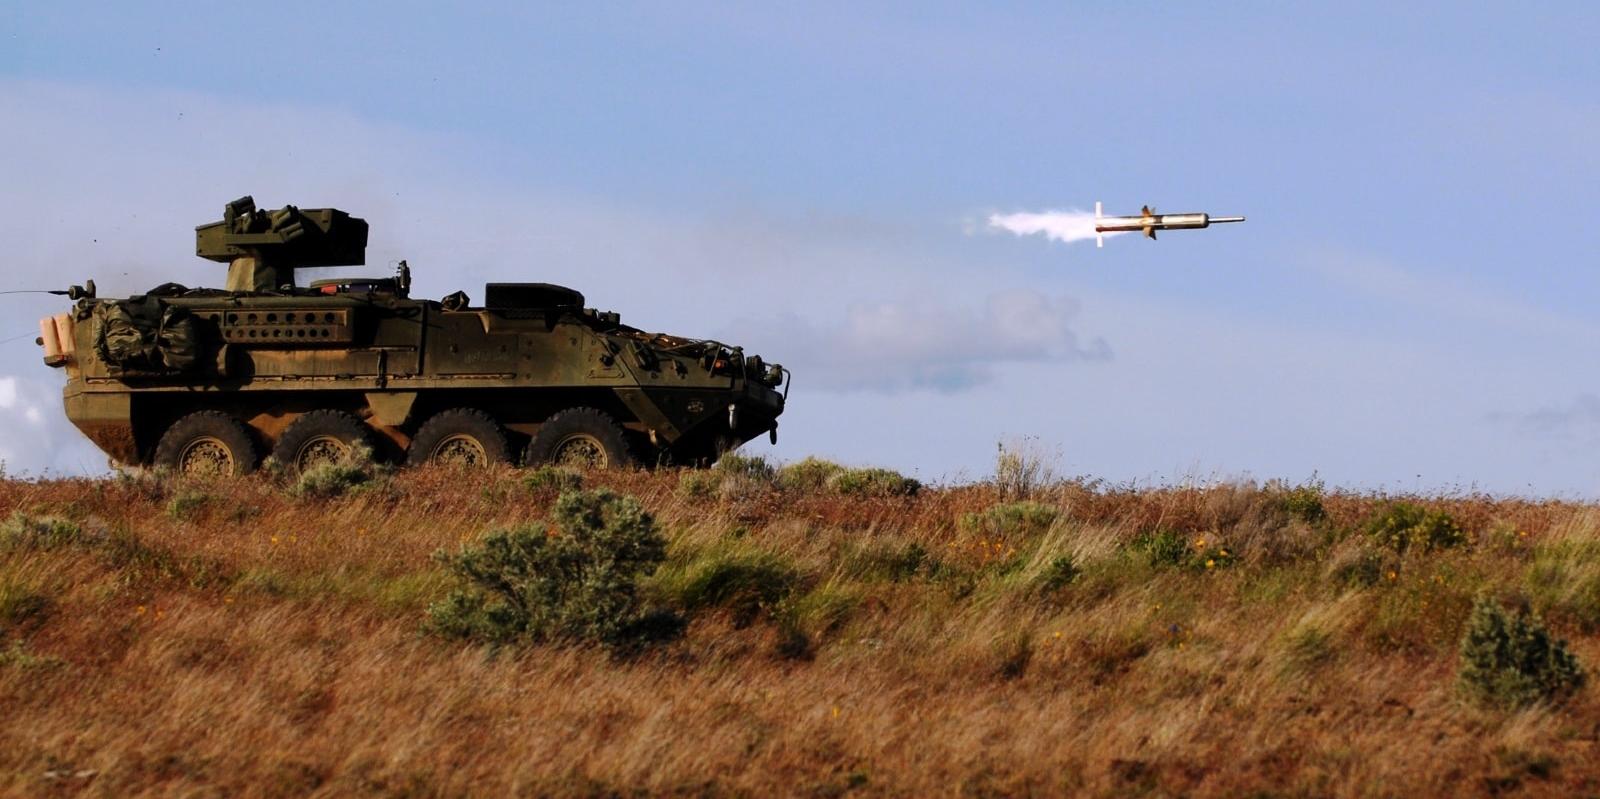 May 28, 2011-Soldiers in C Company 52nd Infantry Regiment, 3rd Stryker Brigade Combat Team, 2nd Infantry Division fire a TOW missile from their Anti-Tank Guided Missile (ATGM) Stryker during a live fire range Yakima Training Ctr.